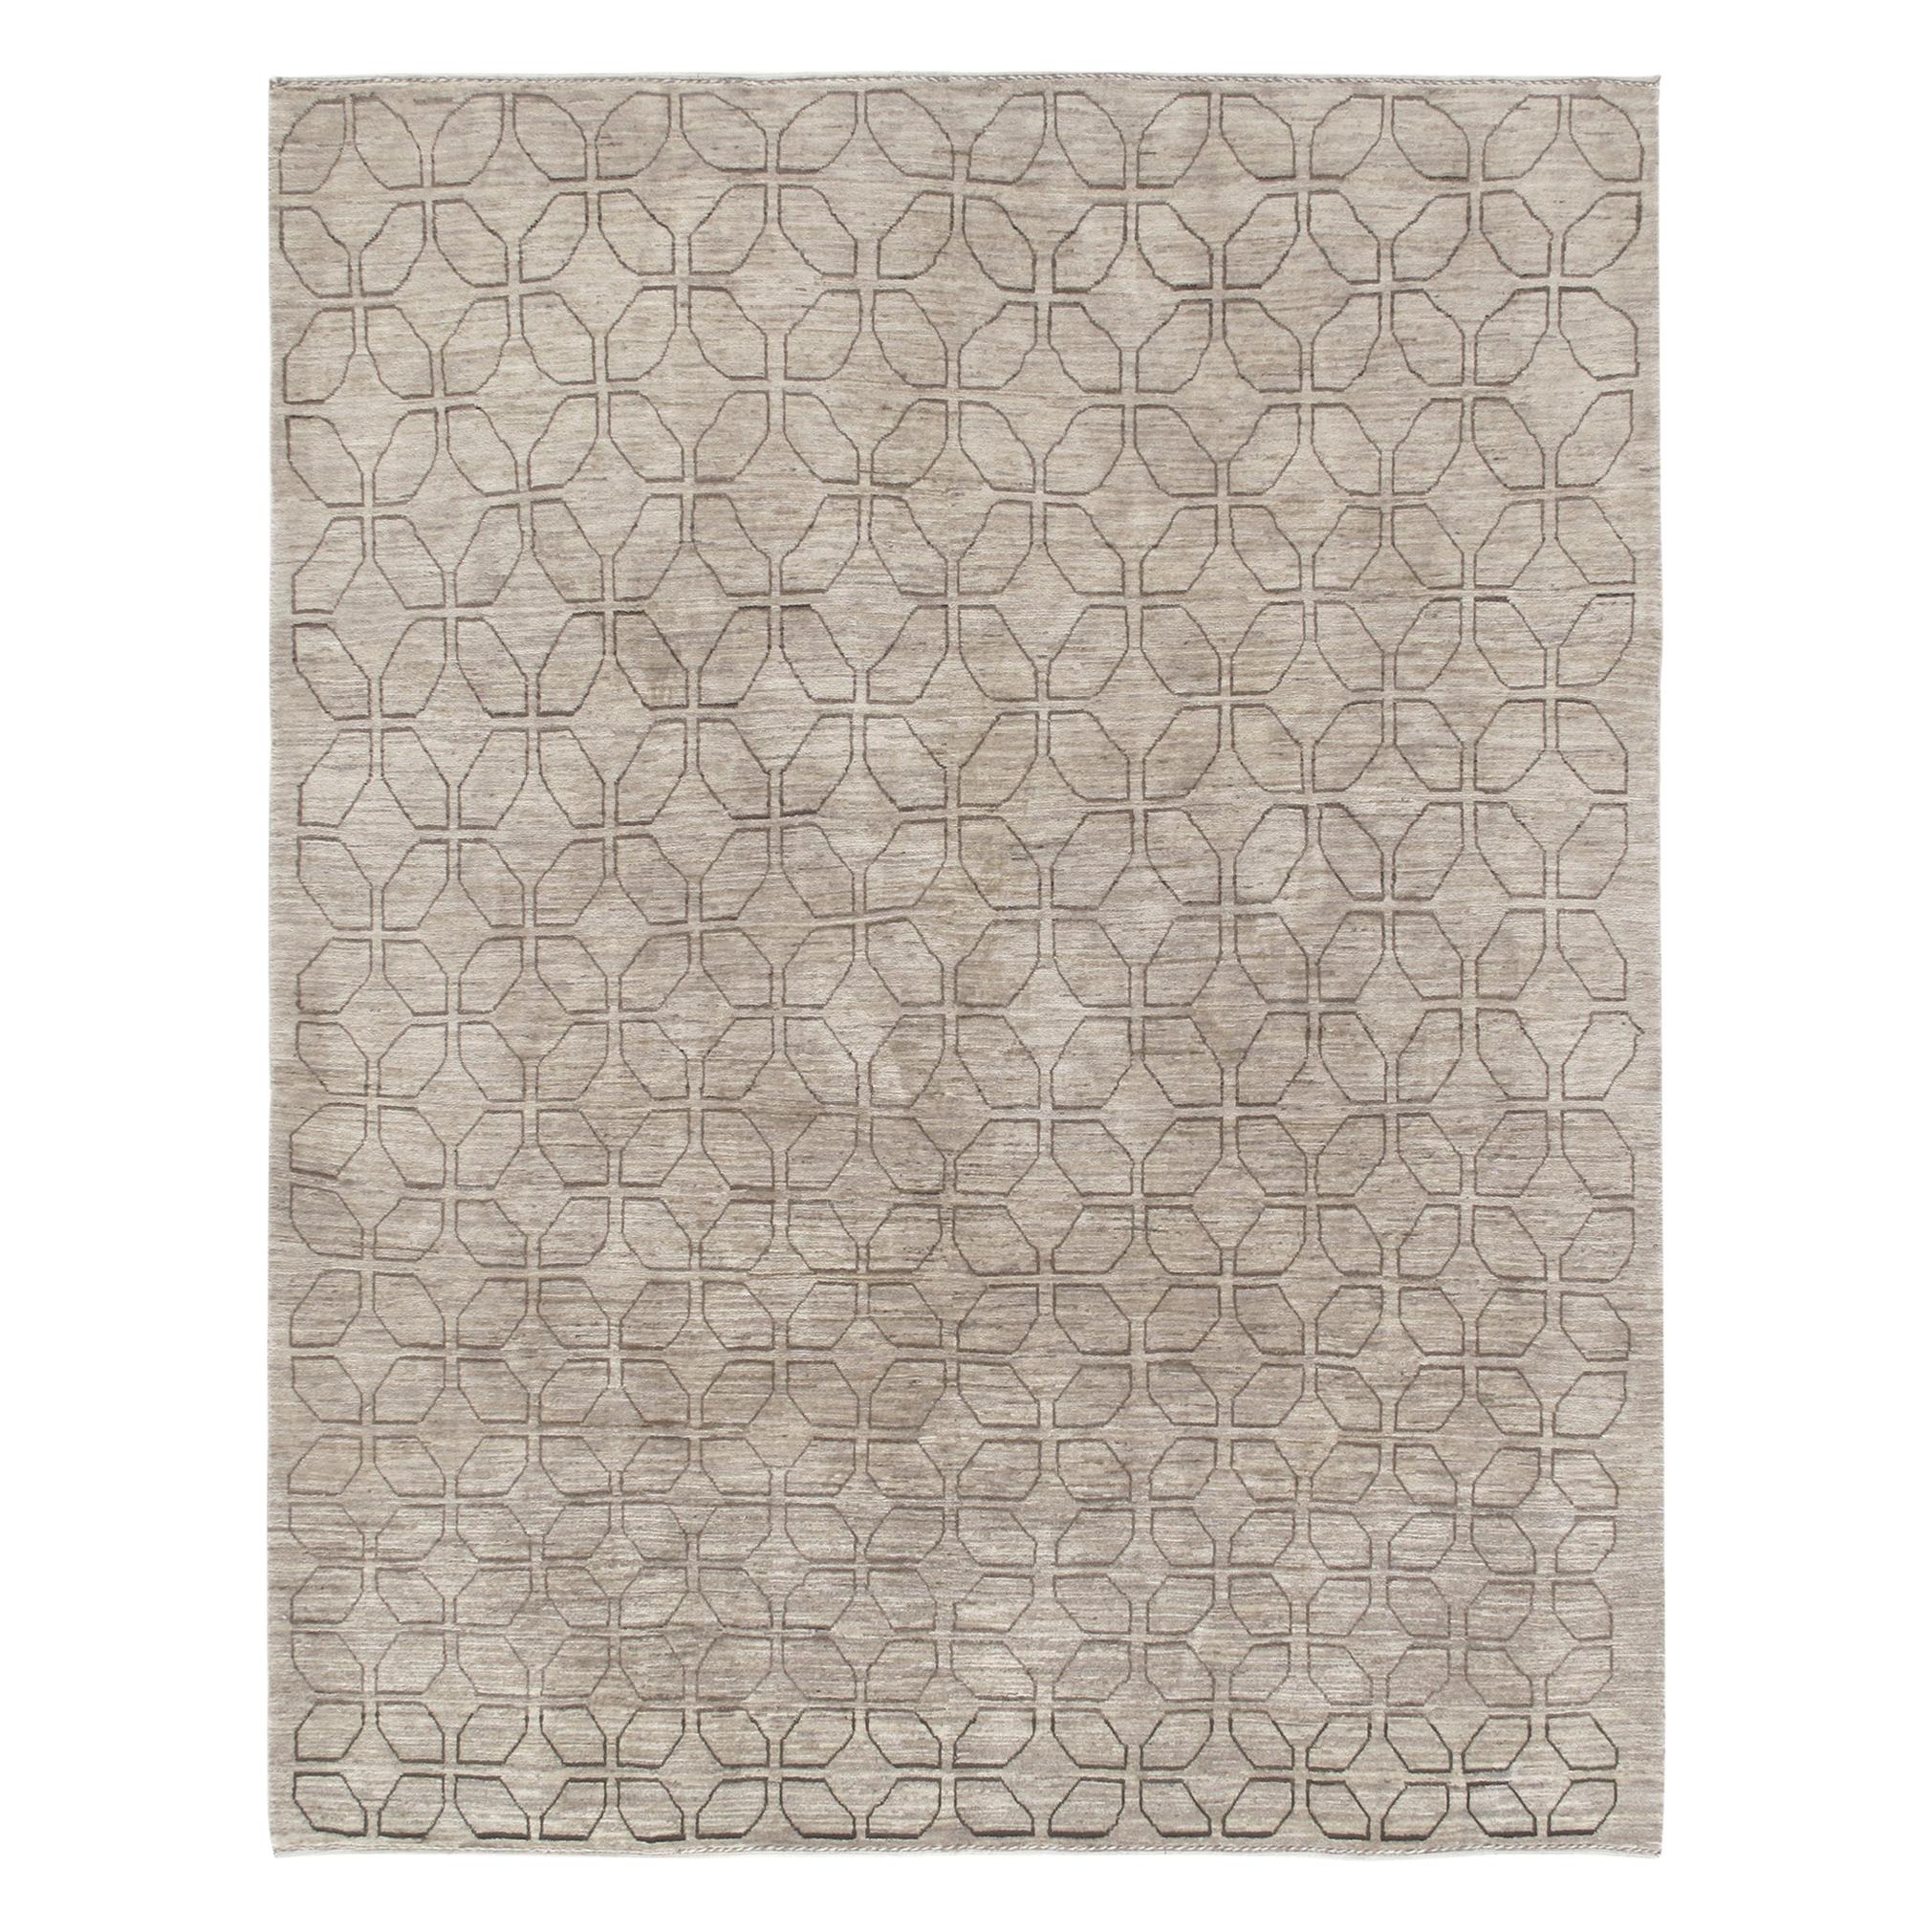 Modern Persian Shiraz Handknotted Rug in Natural Tones